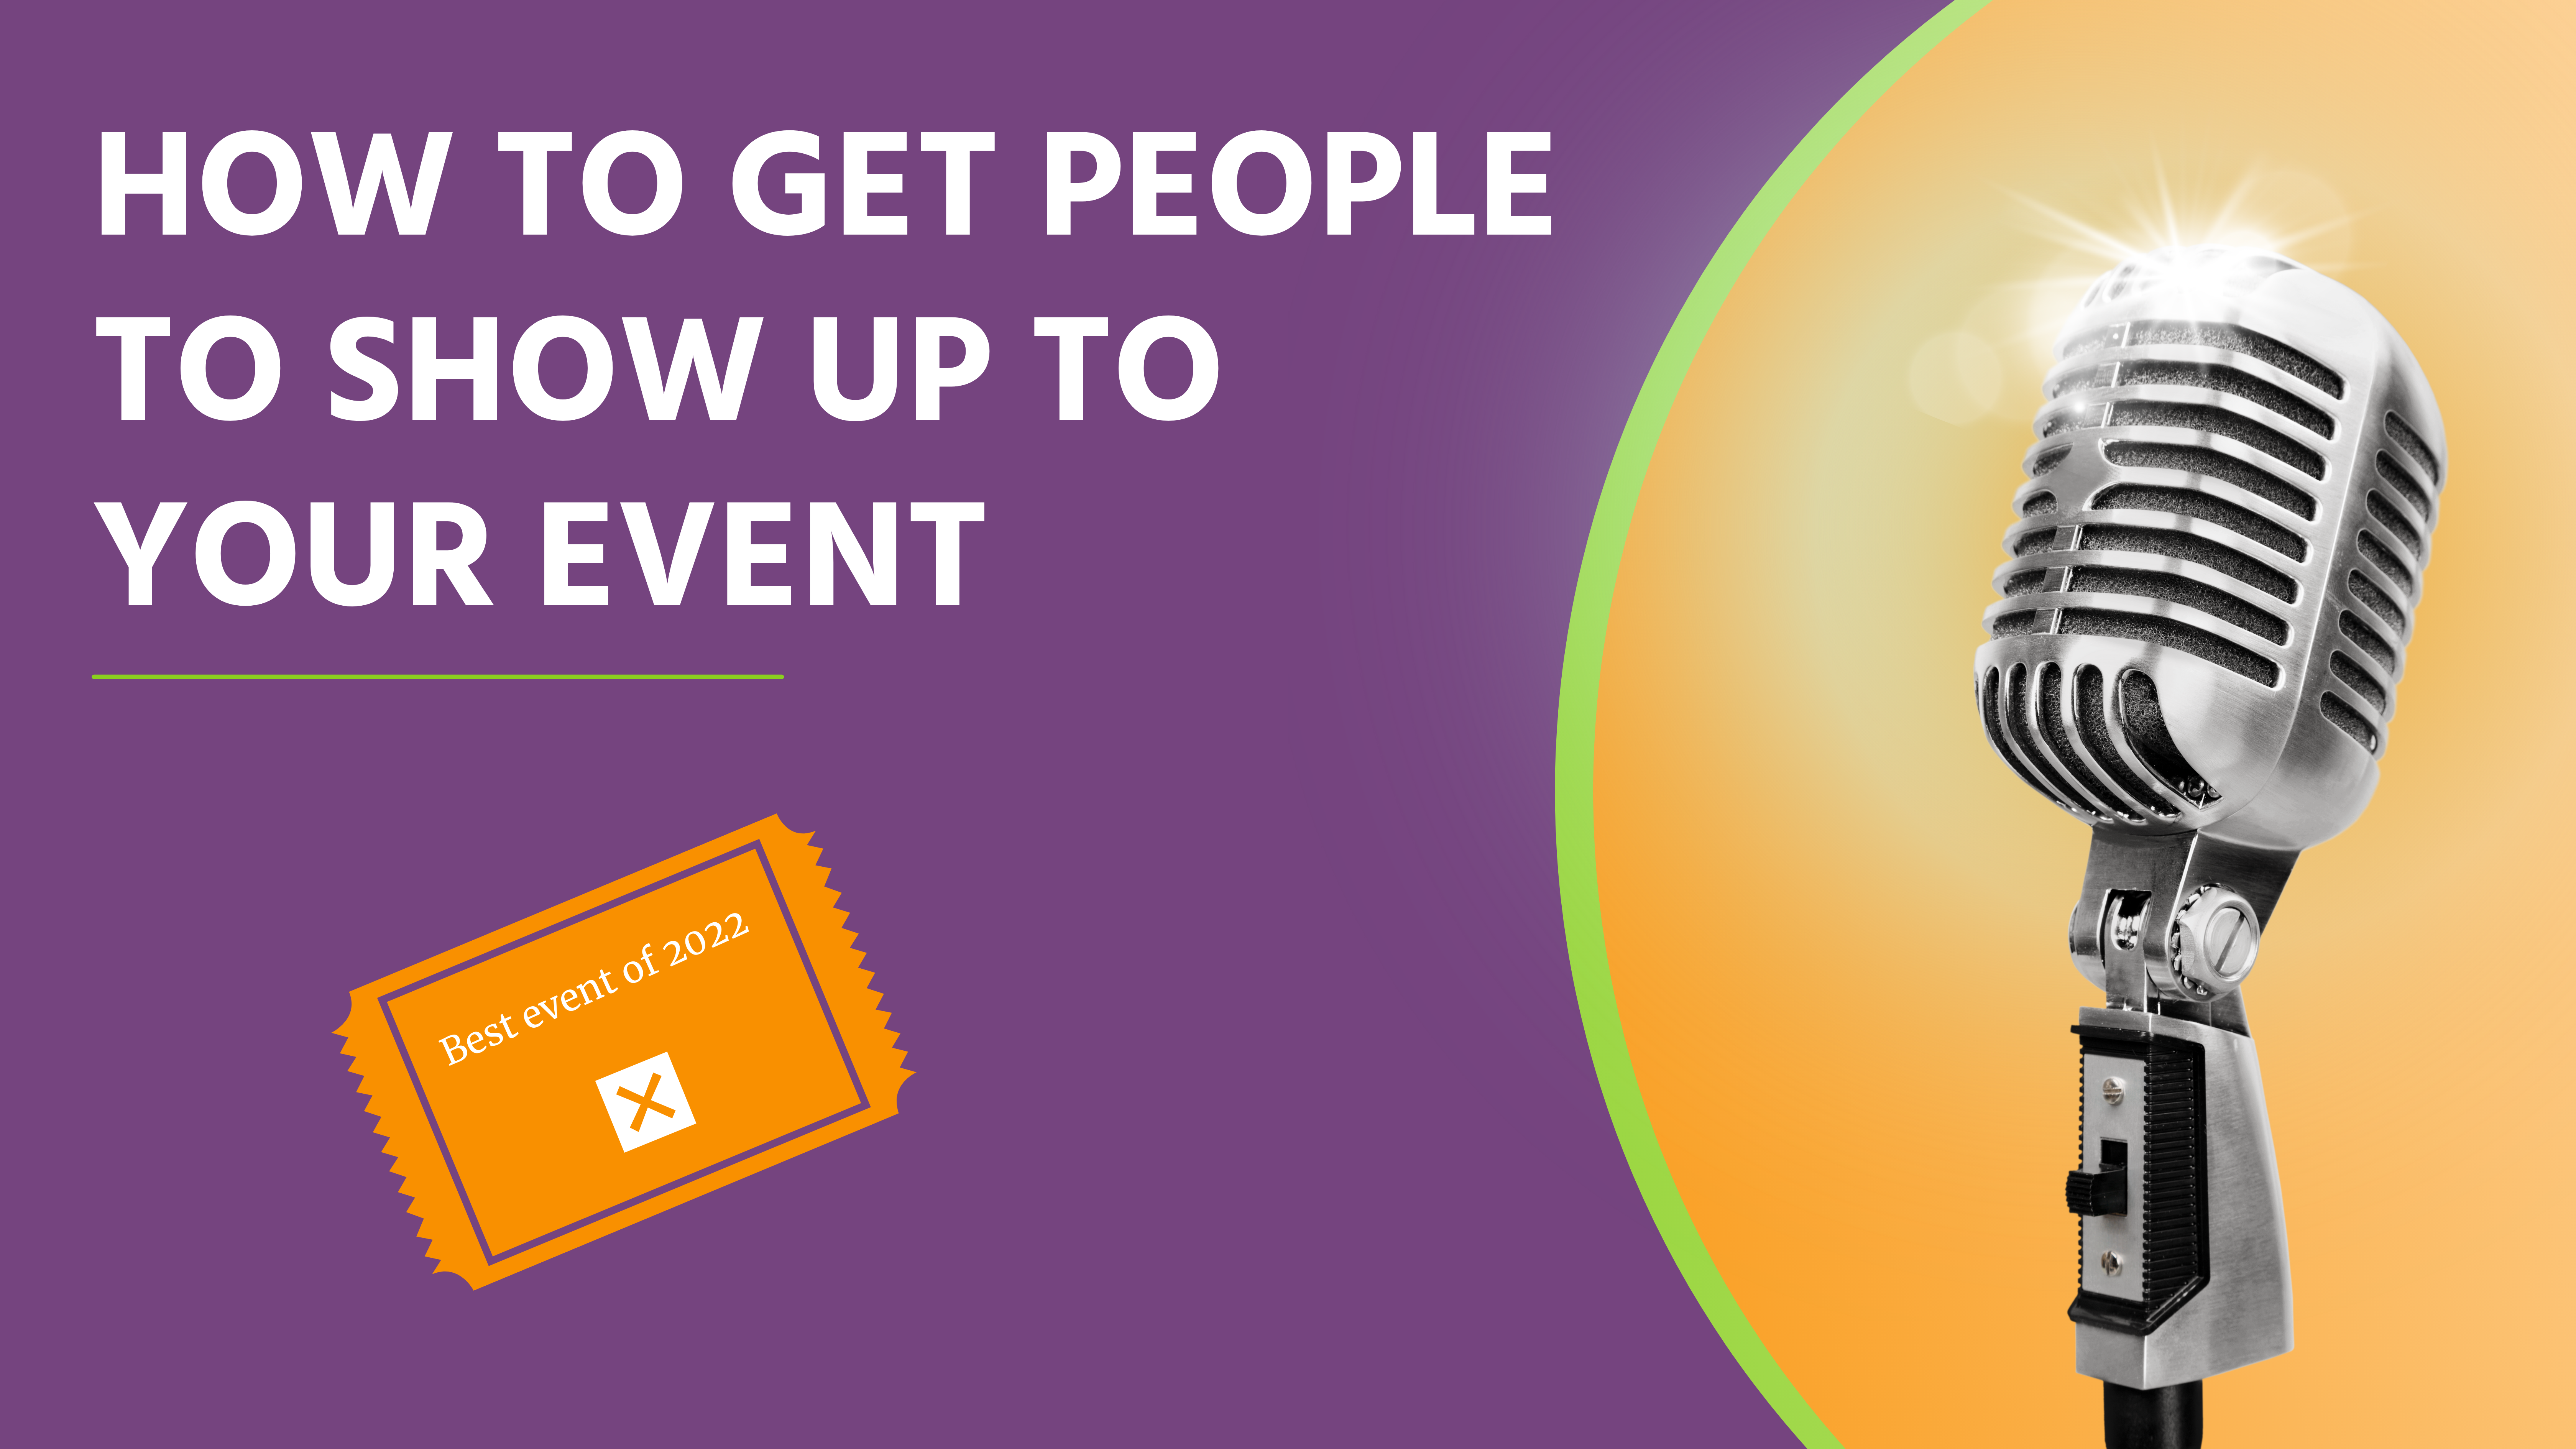 How to get people to show up at your event